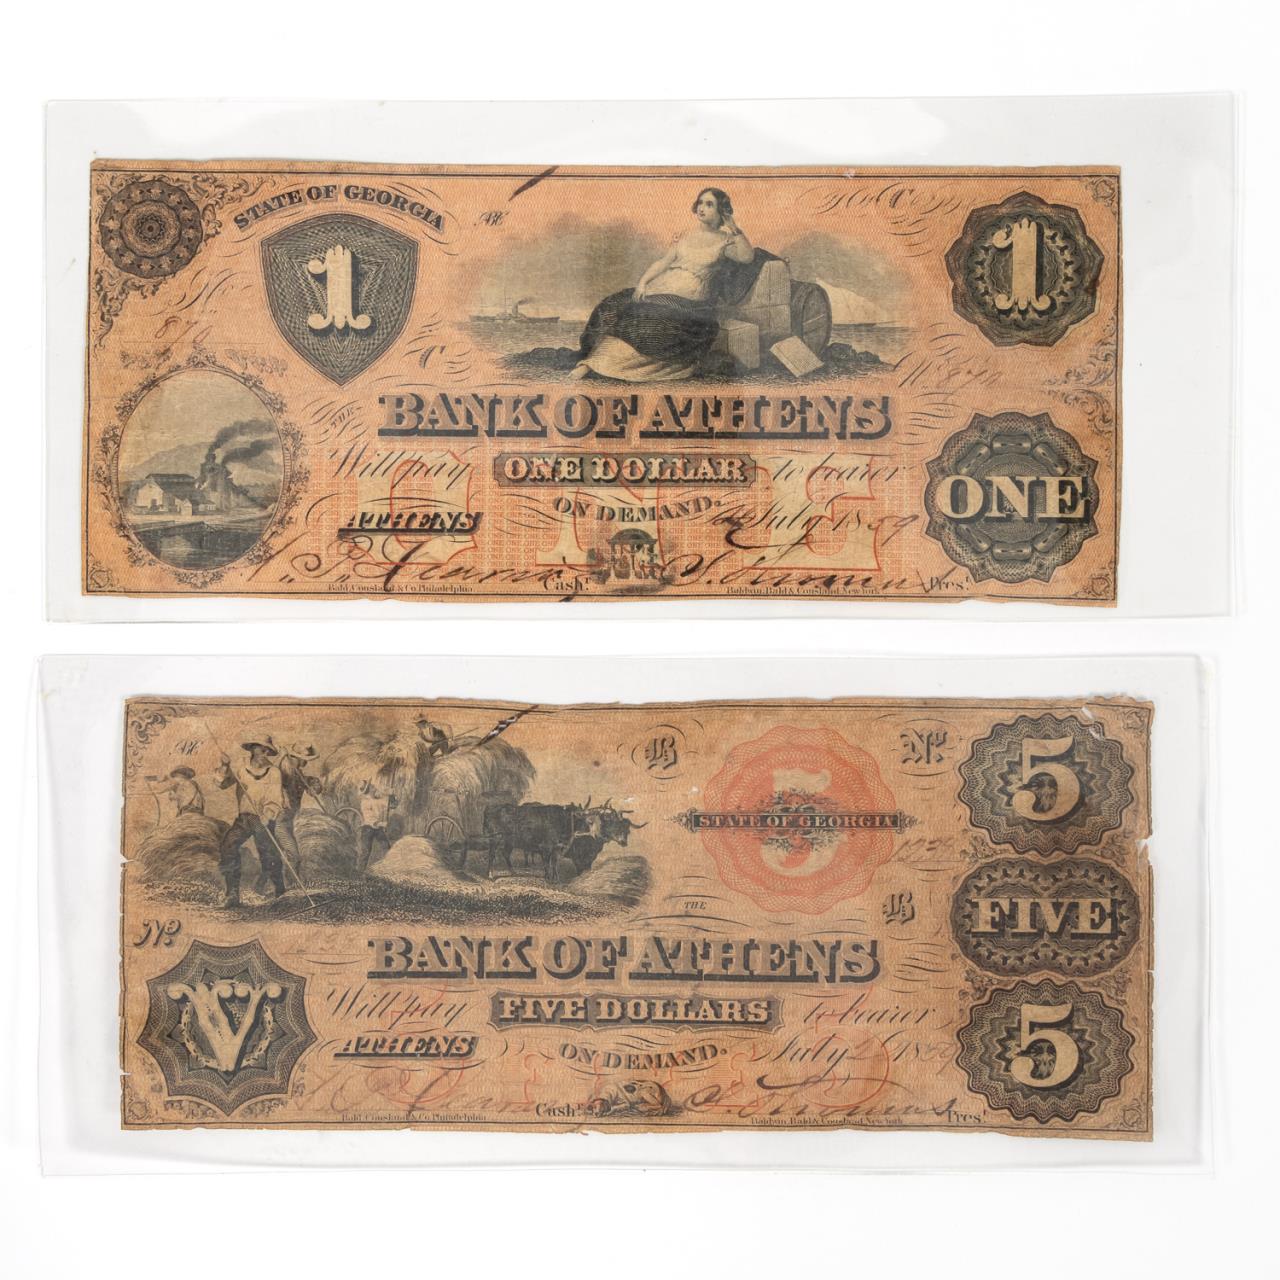 "BANK OF ATHENS" OBSOLETE NOTES,